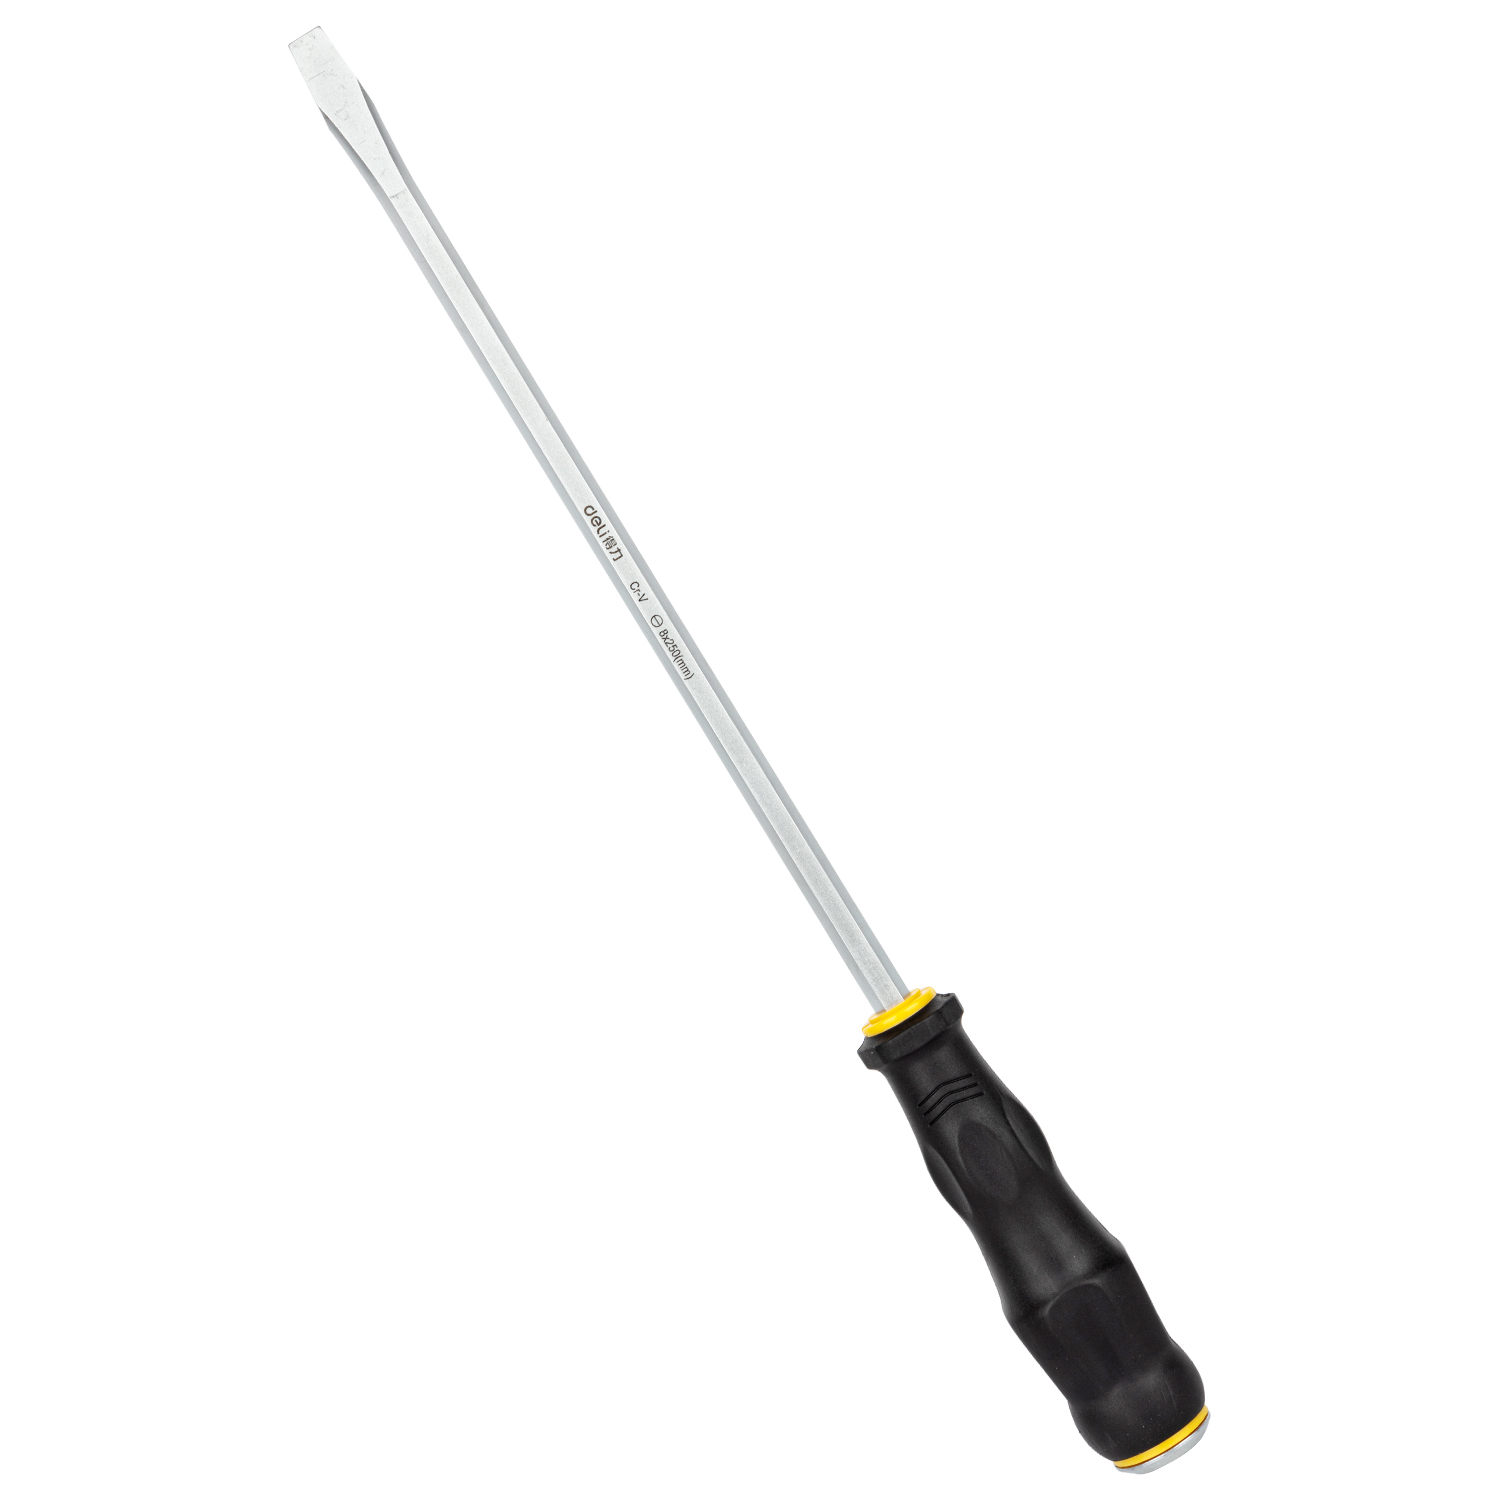 Slotted Screwdriver with Pass-thru Shank 8*250mm